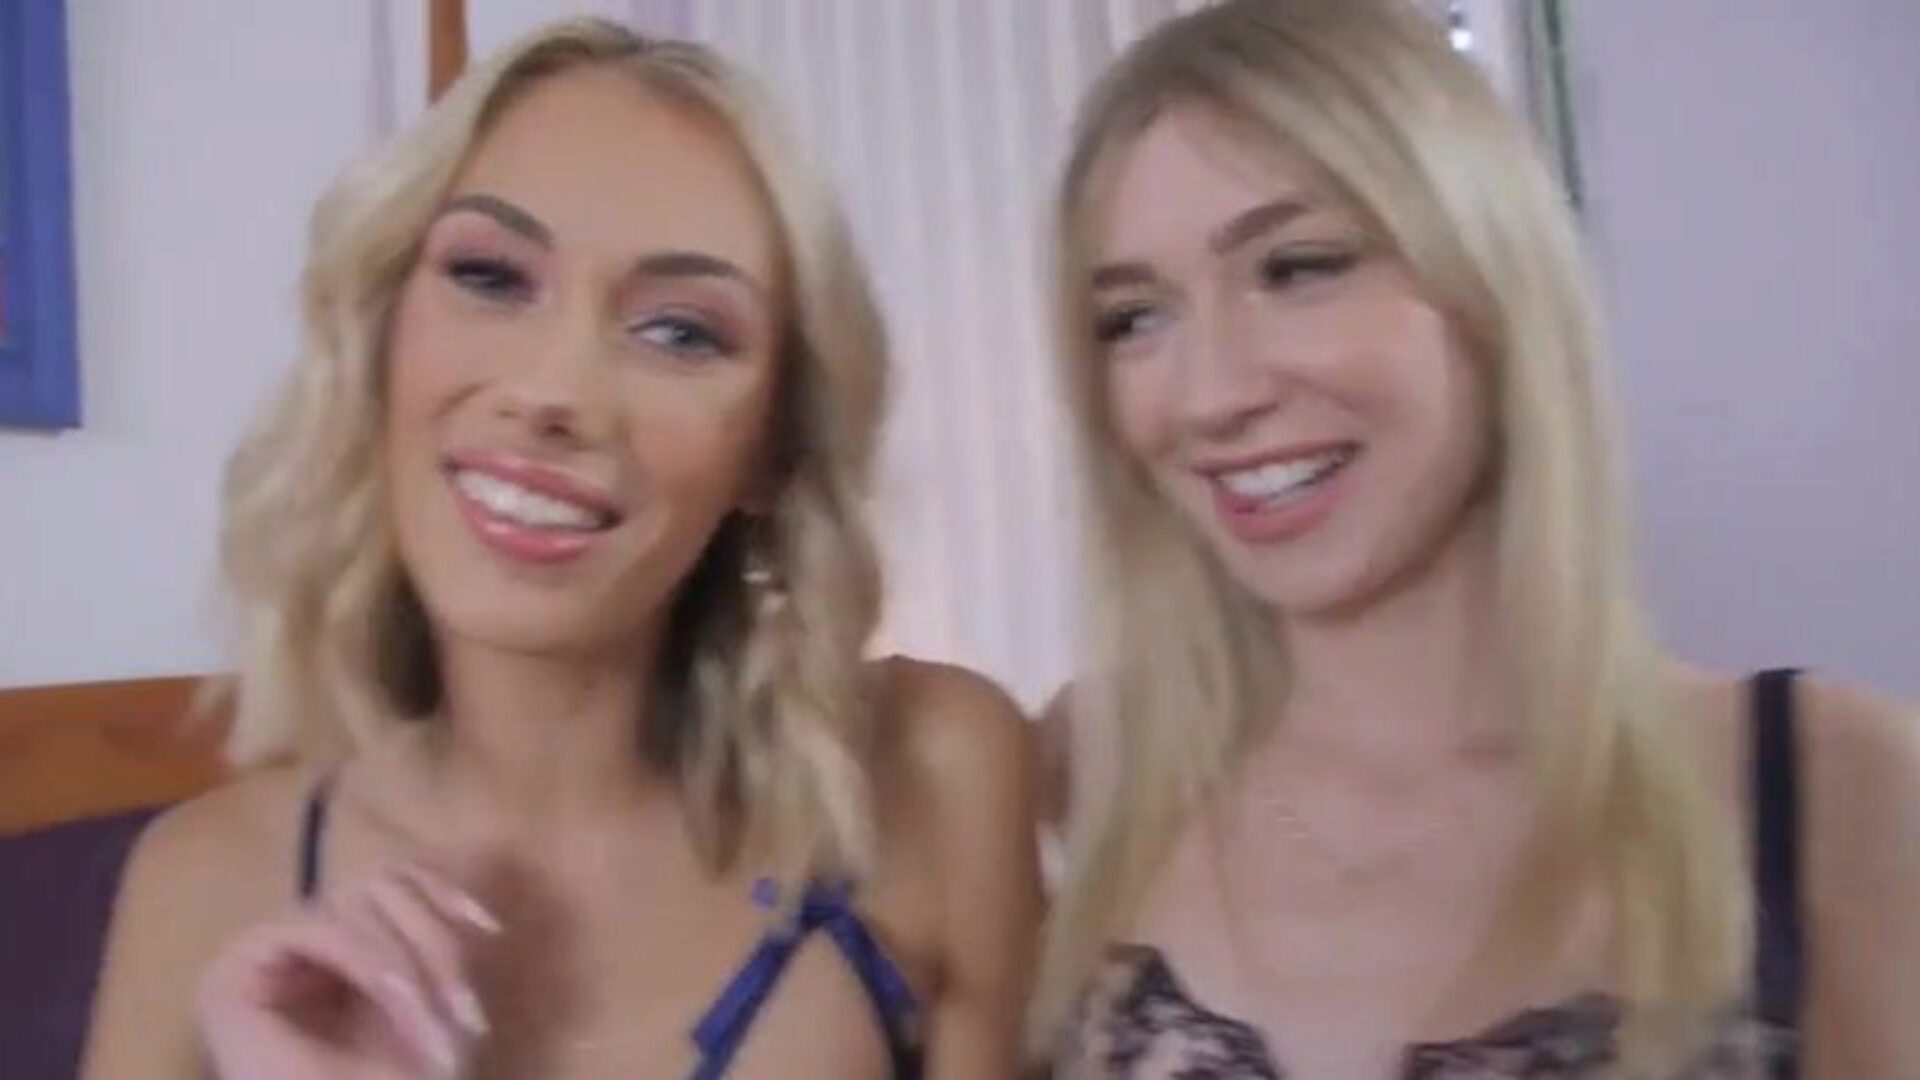 two Newbie Blondes Tease & Take Up With The Tongue Every other Sky Pierce and Mackenzie Moss might not be the almost any seasoned Rug Riders around here, but they sure as hell learn glamorous fast